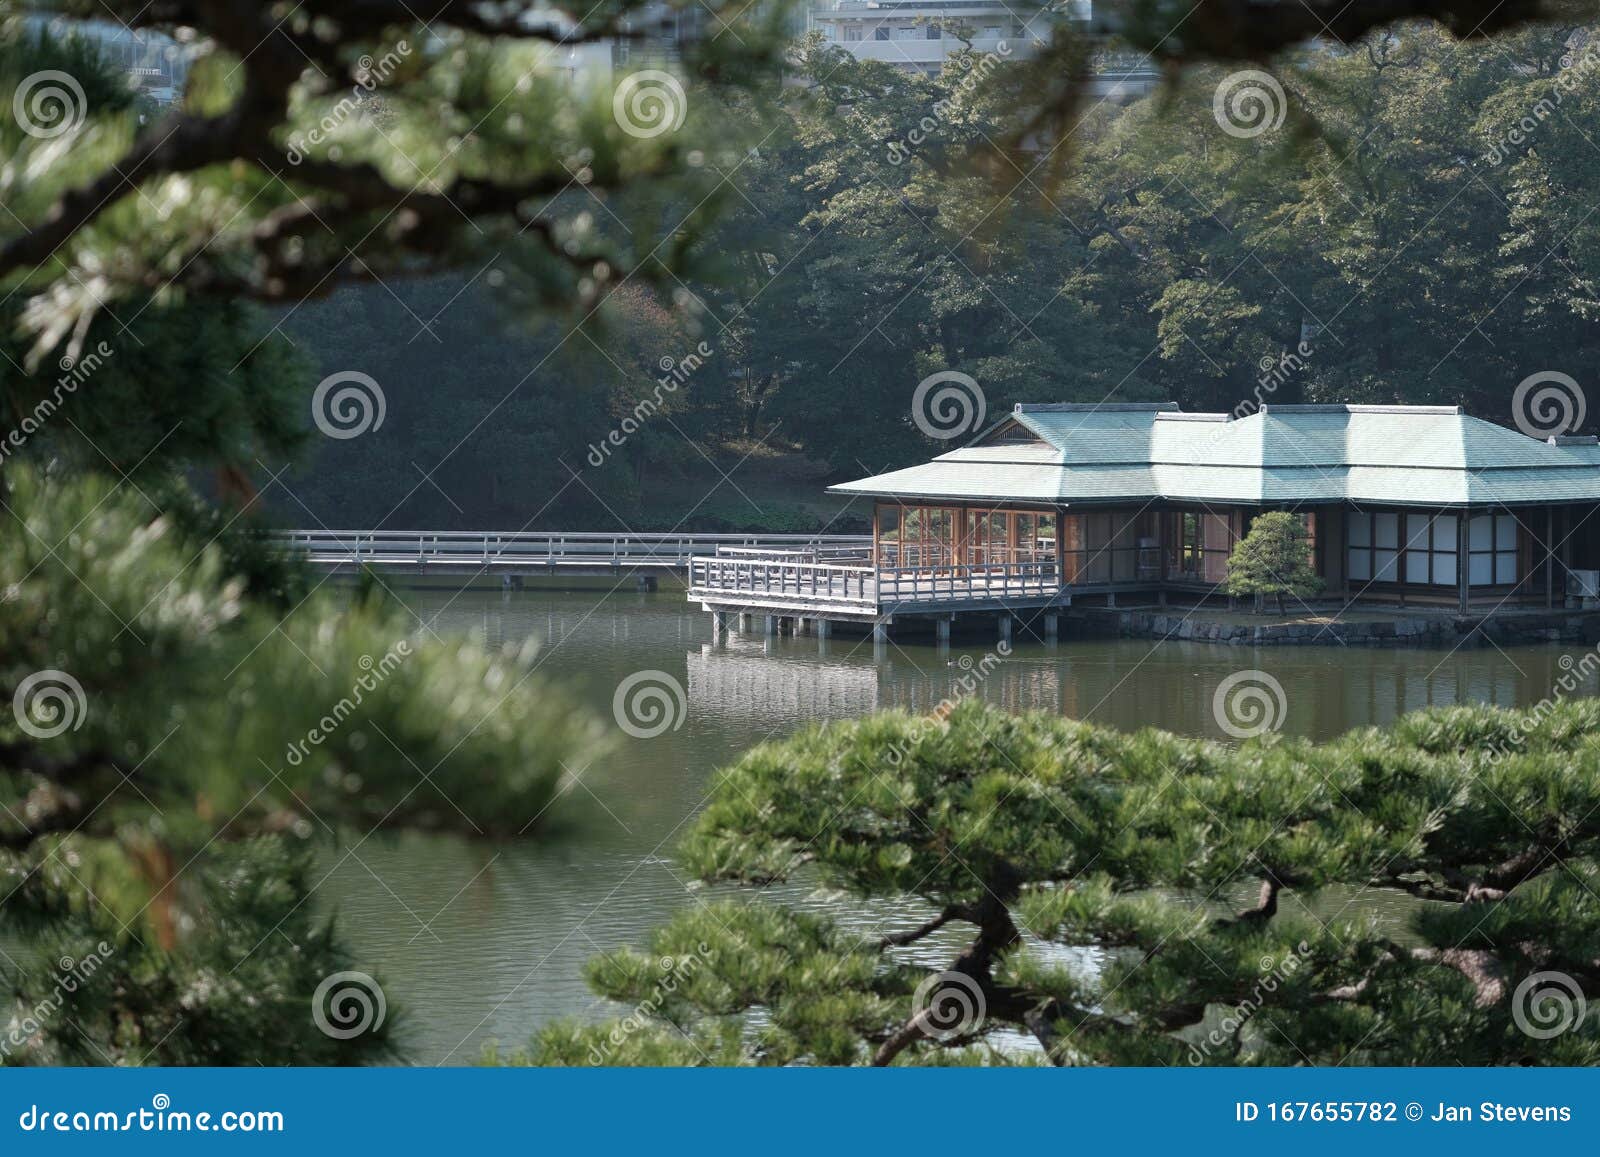 Japanese Tea House In A Garden At A Lake Stock Photo Image Of